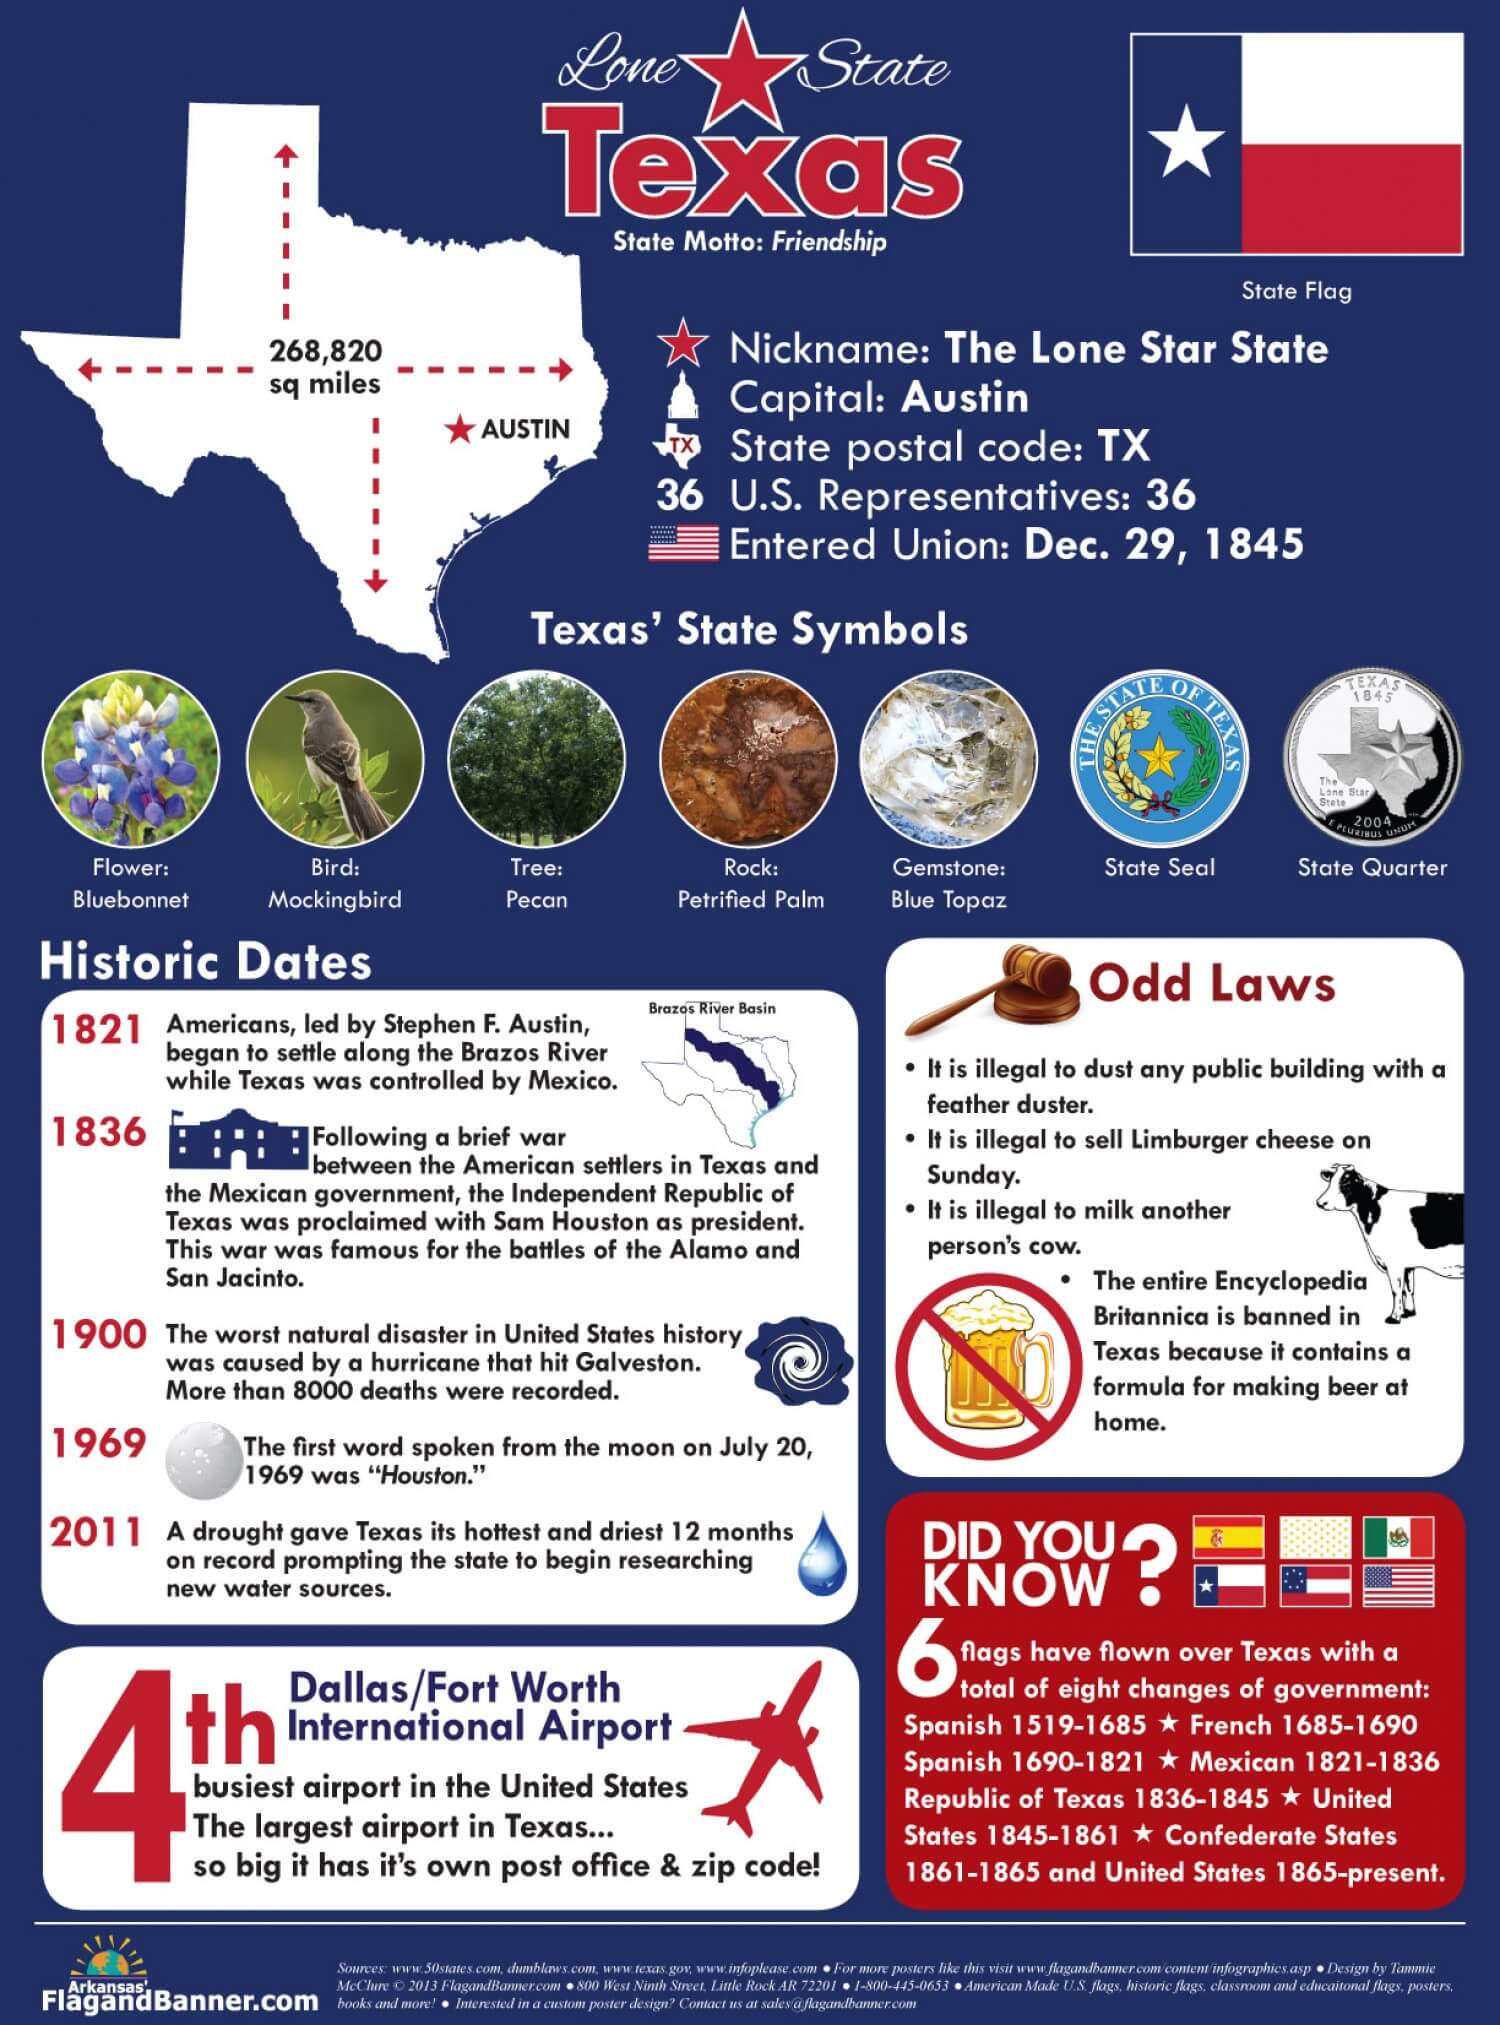 texas-the-lone-star-state_51facd7f87467_w1500